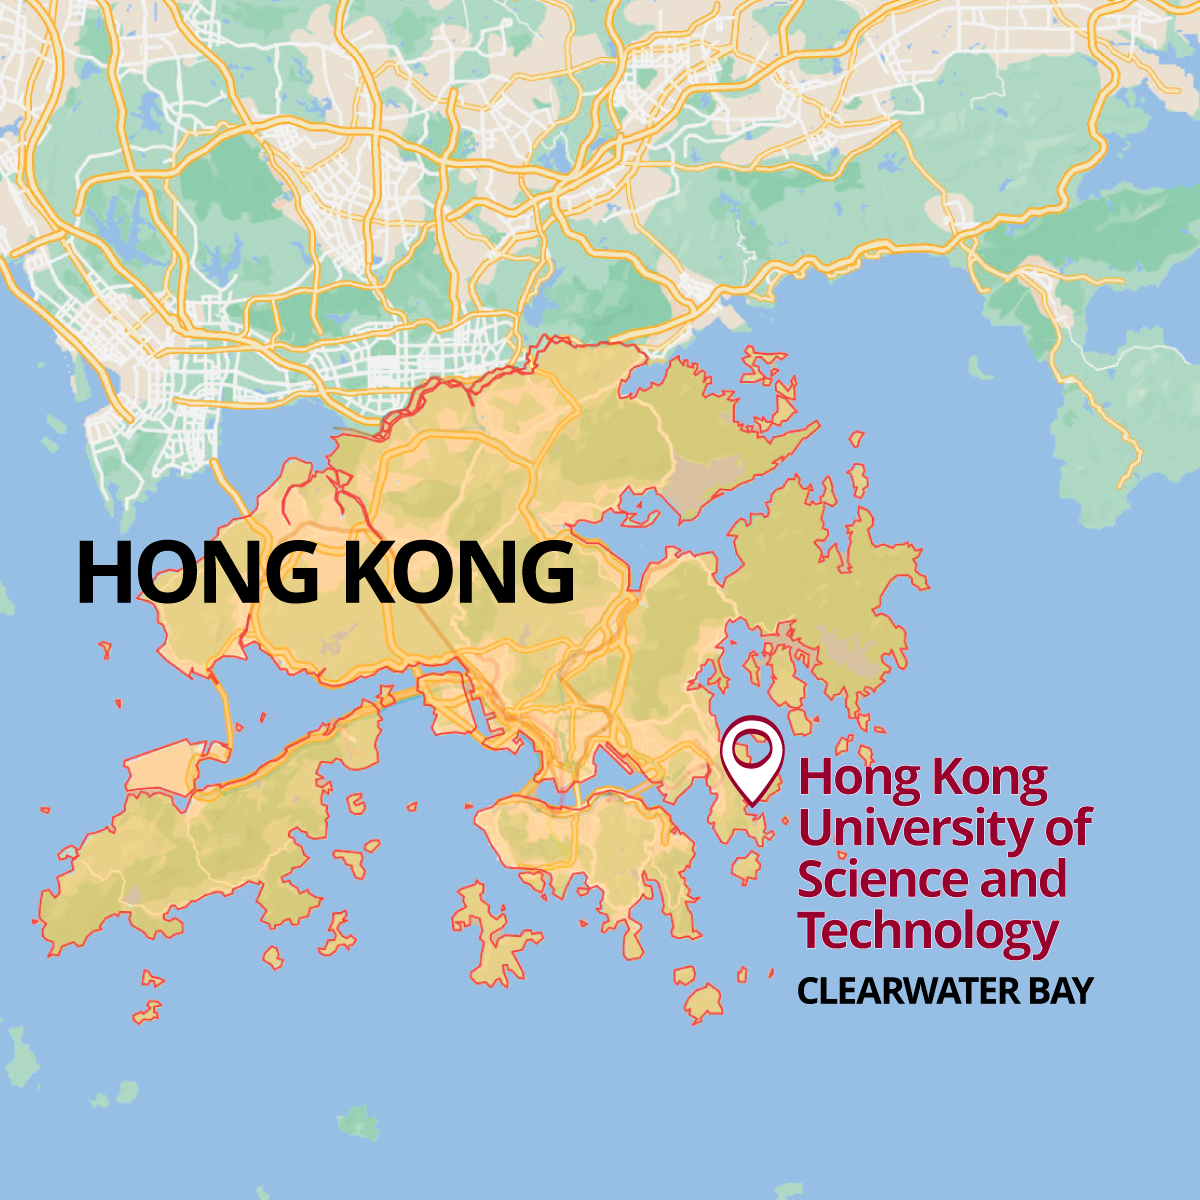 A map of China with the Hong Kong University of Science and Technology highlighted